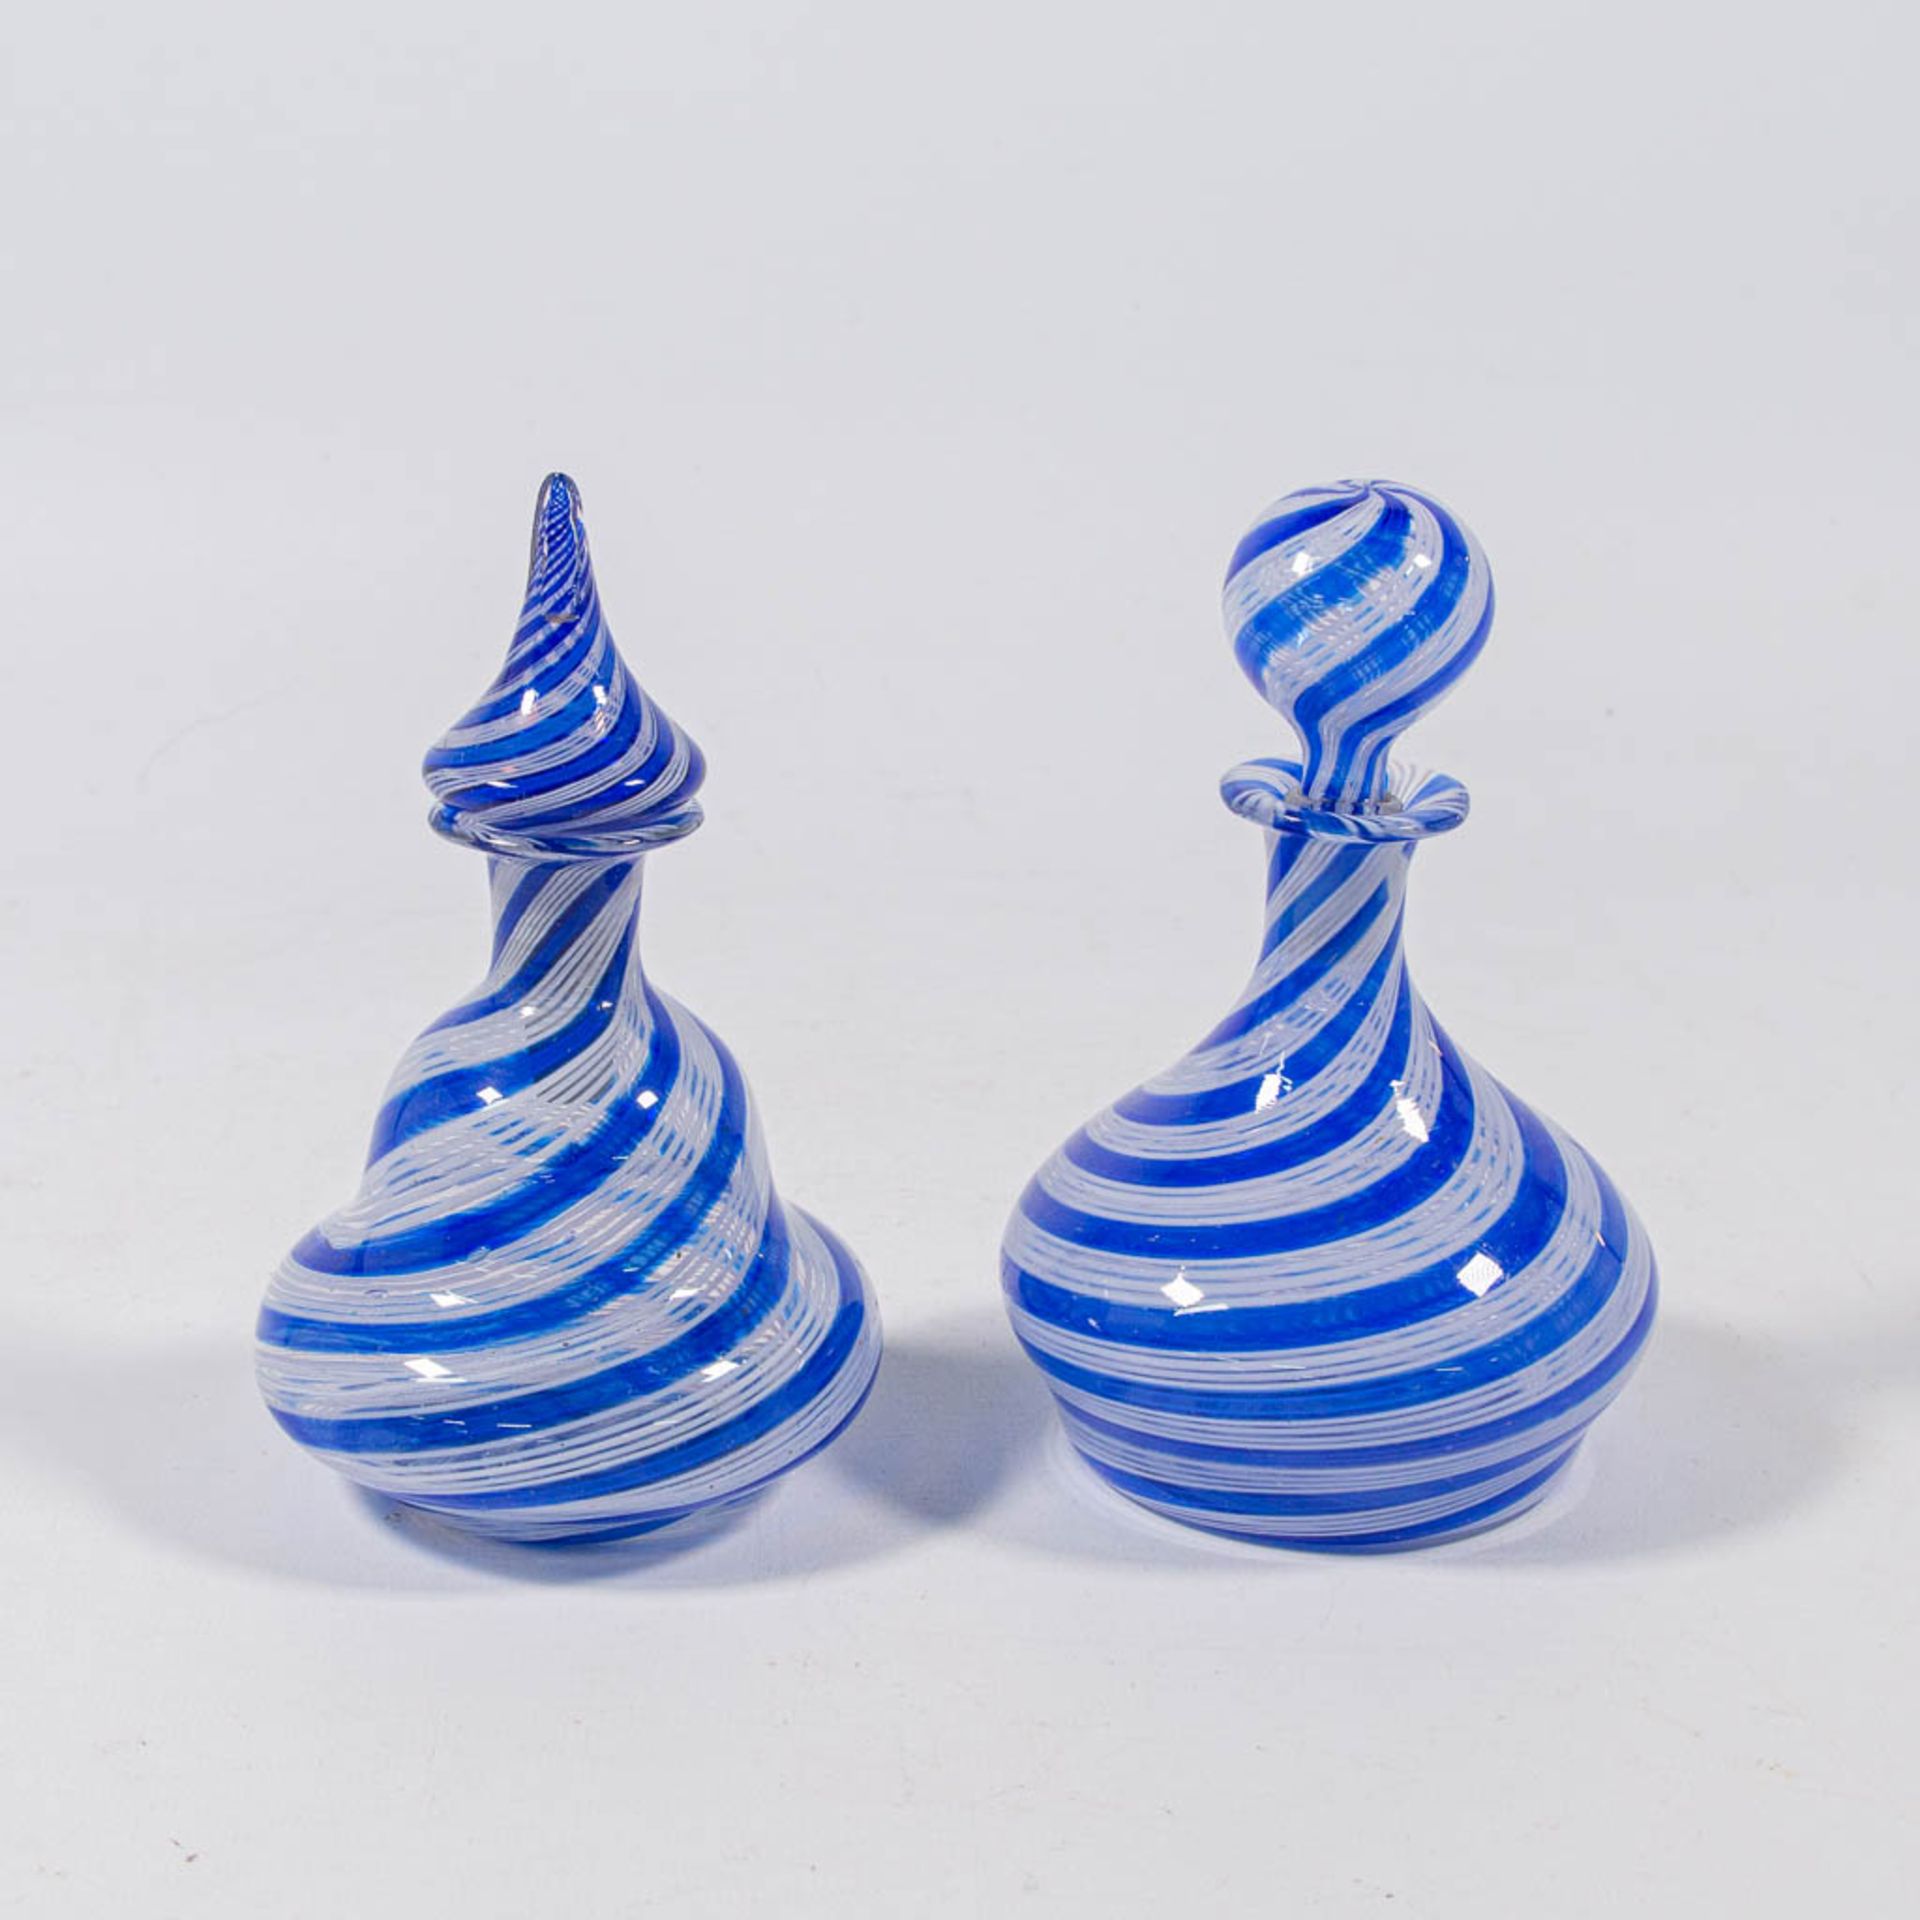 A pair of decanters with stopper, made in Murano, Italy around 1950. (15 x 9 cm) - Image 3 of 17